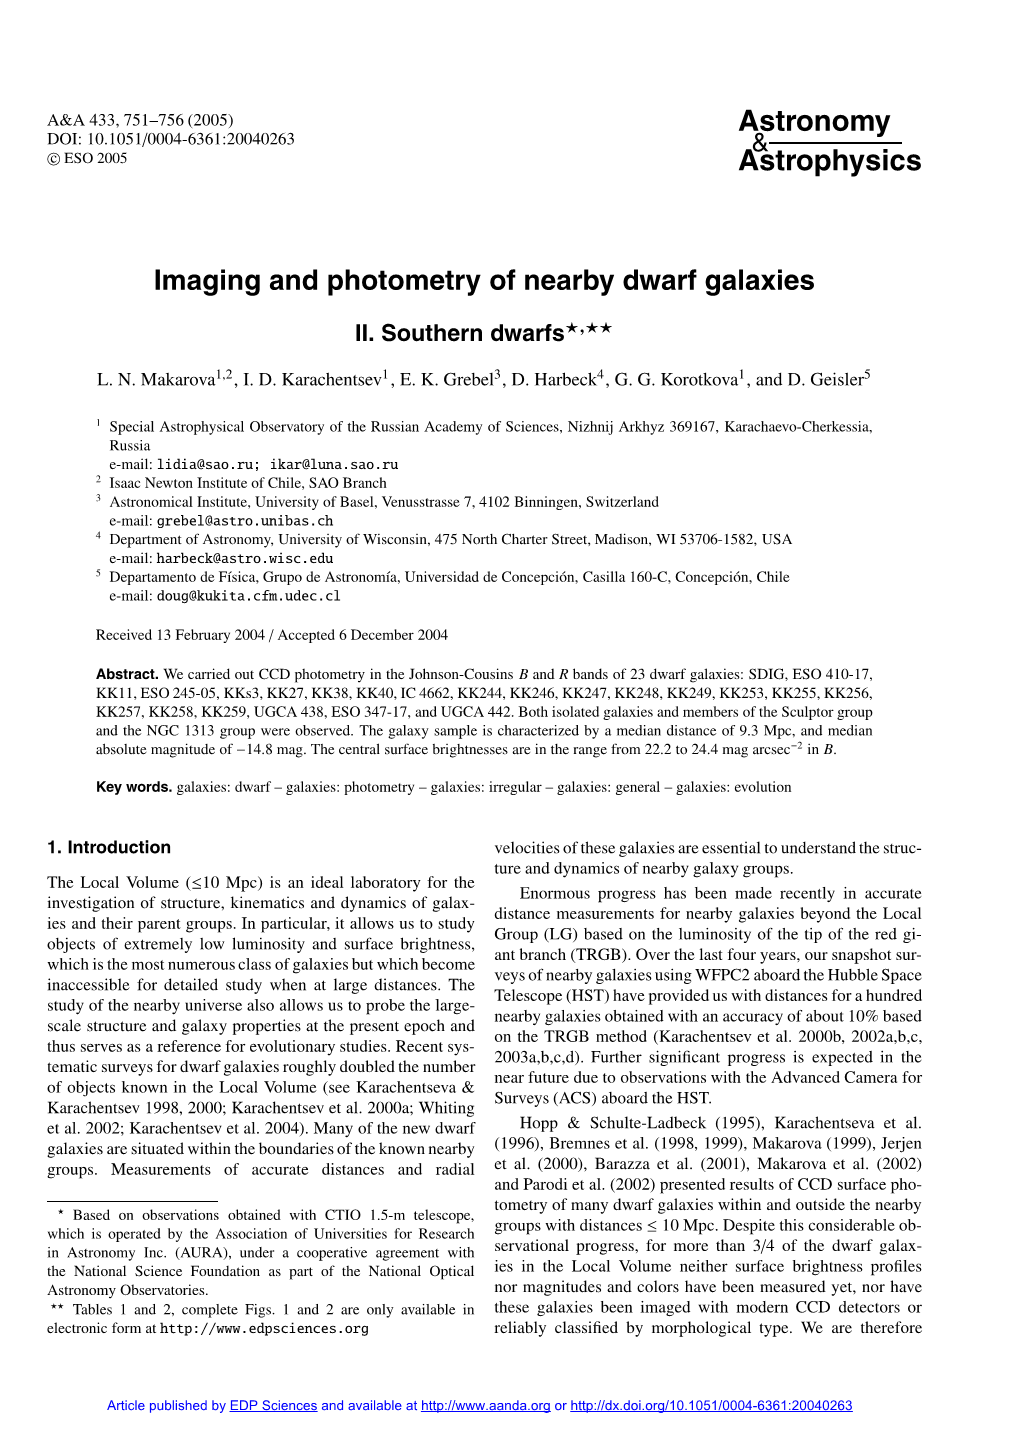 Imaging and Photometry of Nearby Dwarf Galaxies